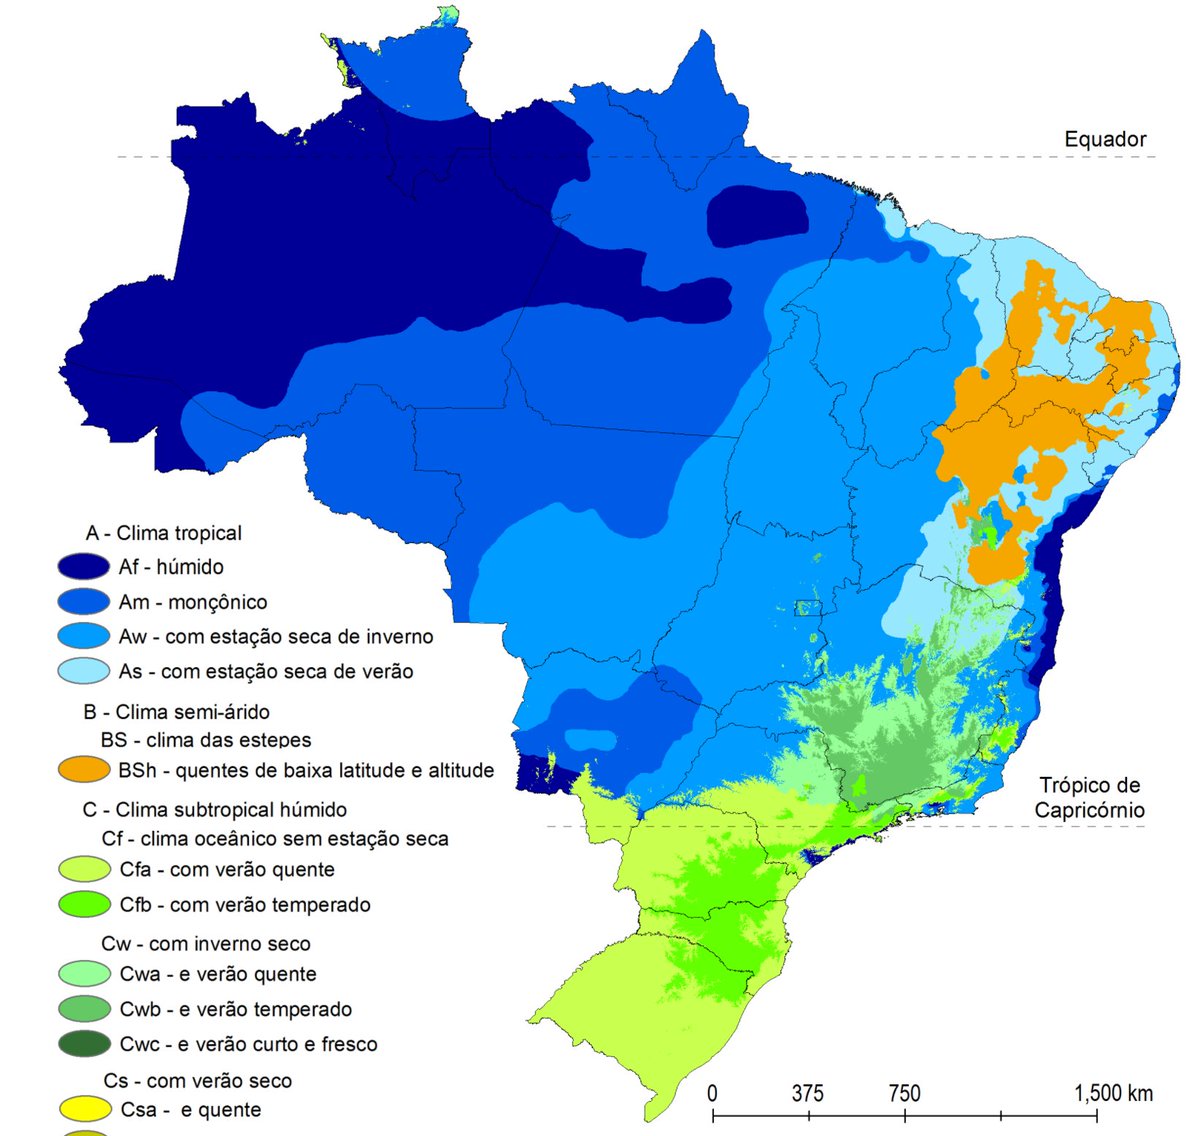 Here is a climate map for Brazil. The Amazon district is notable for high humidity